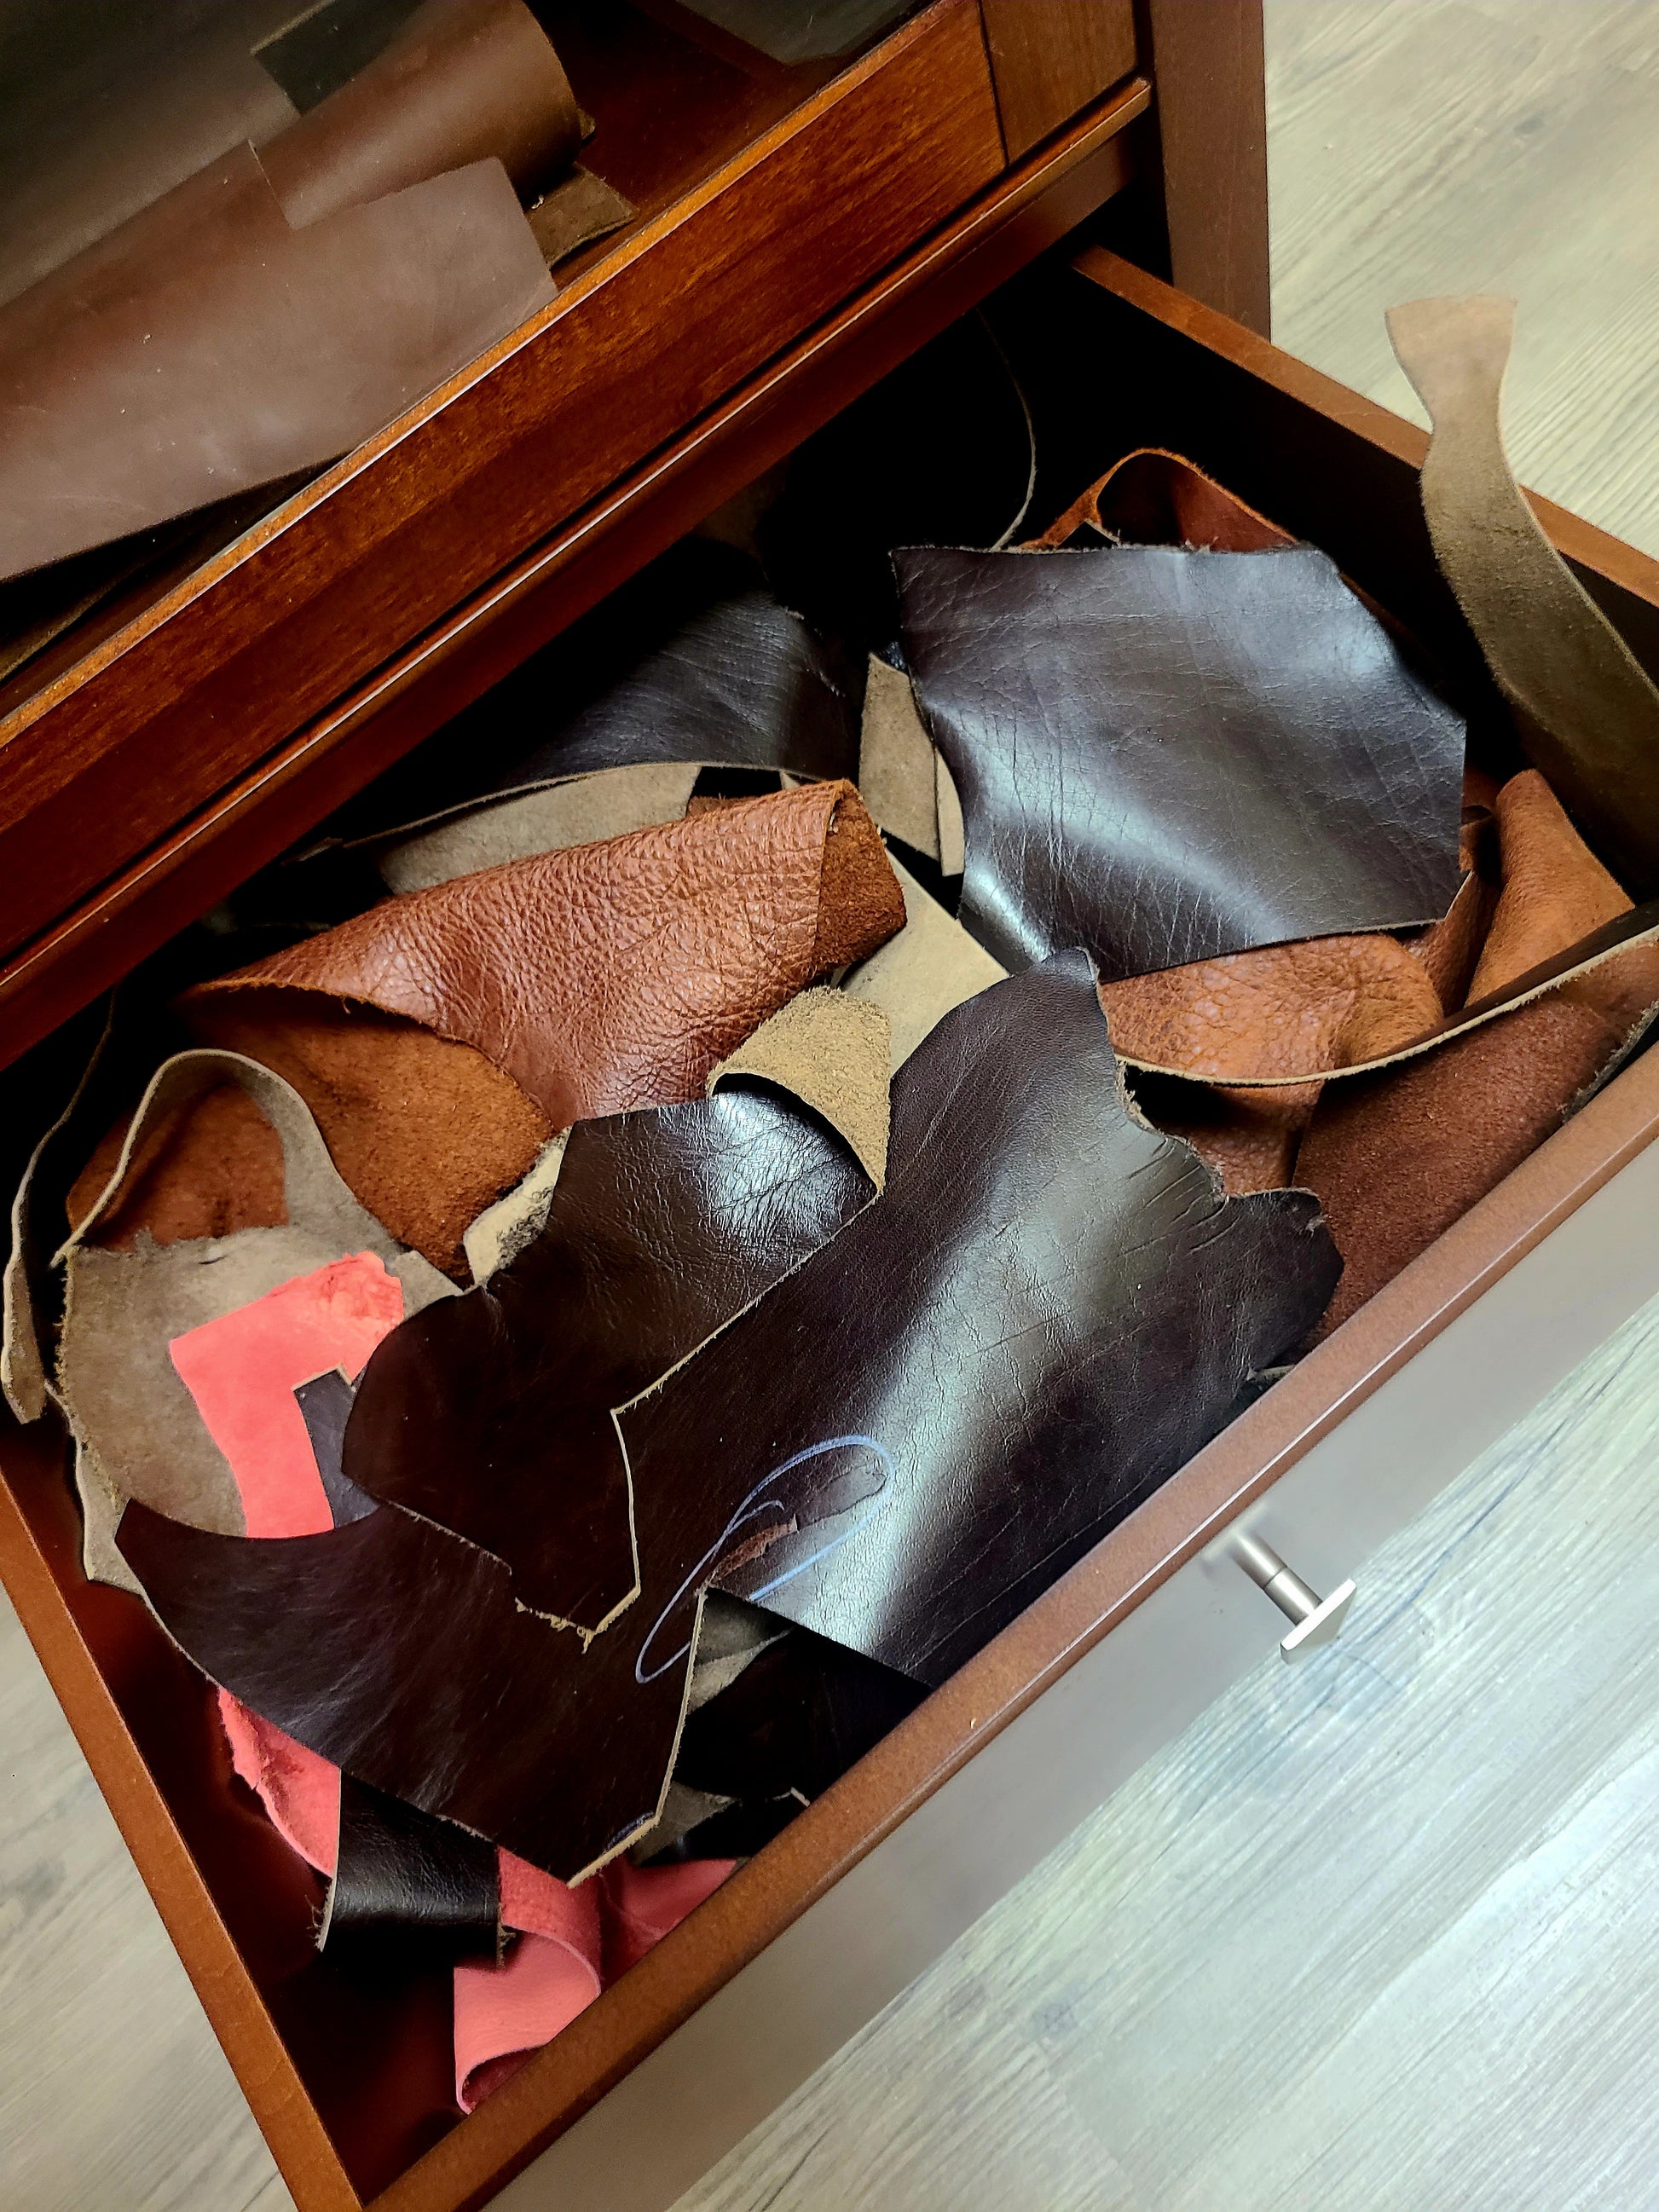 Leather Remnants - 1Lb in Linen Bag – Status Co. Leather Studio